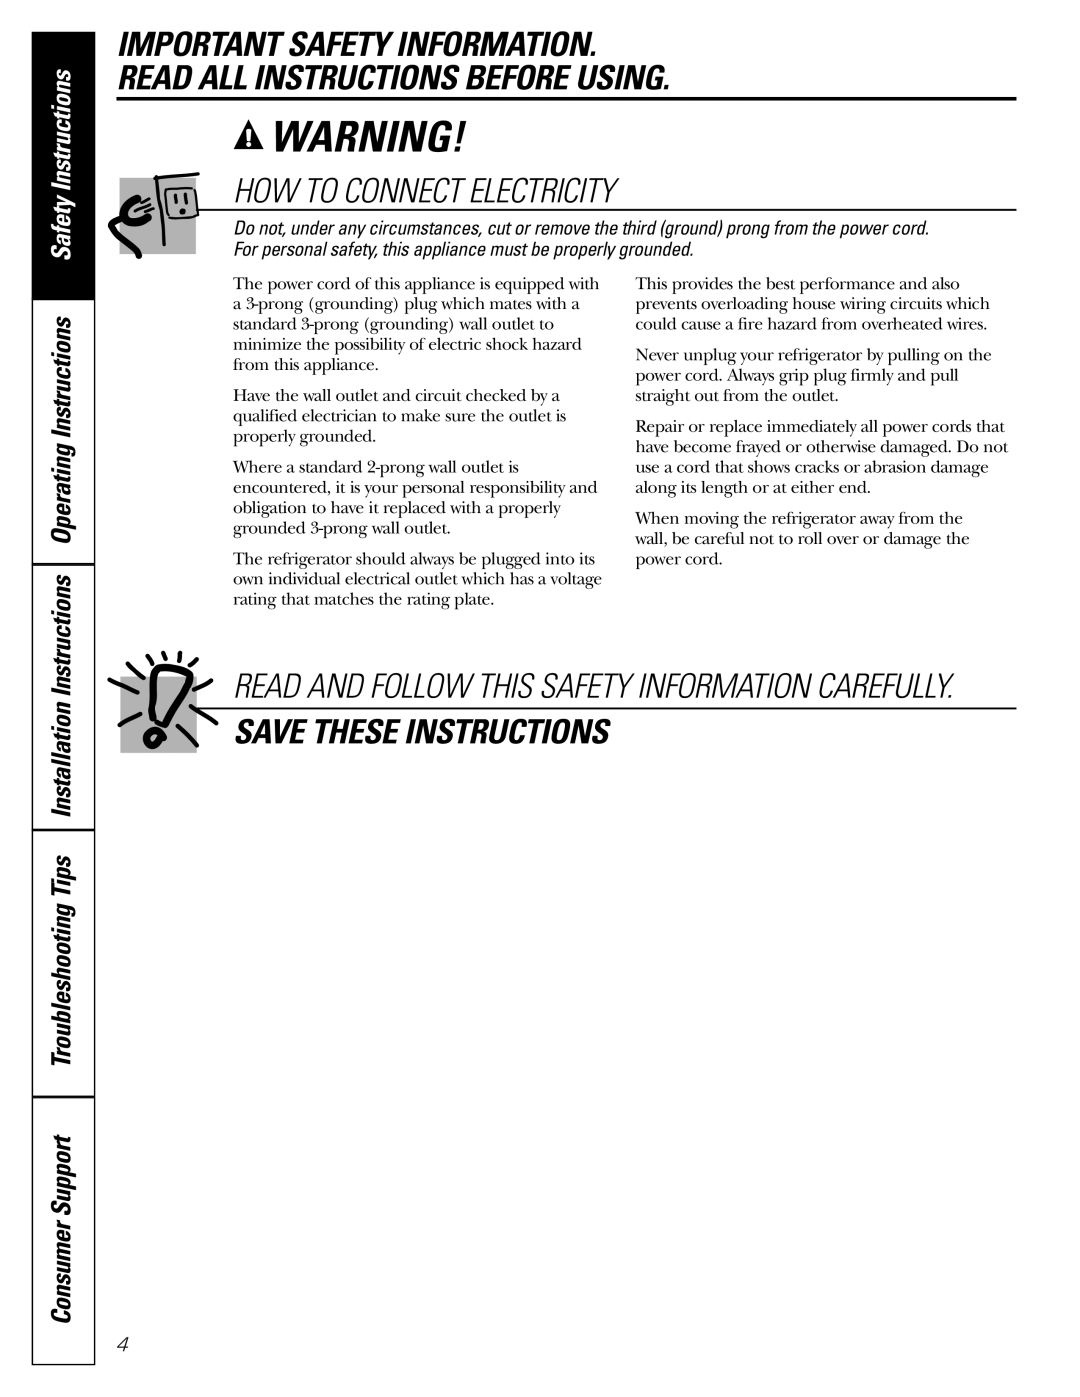 GE GTL21, GTH21 How To Connect Electricity, Save These Instructions, Read And Follow This Safety Information Carefully 